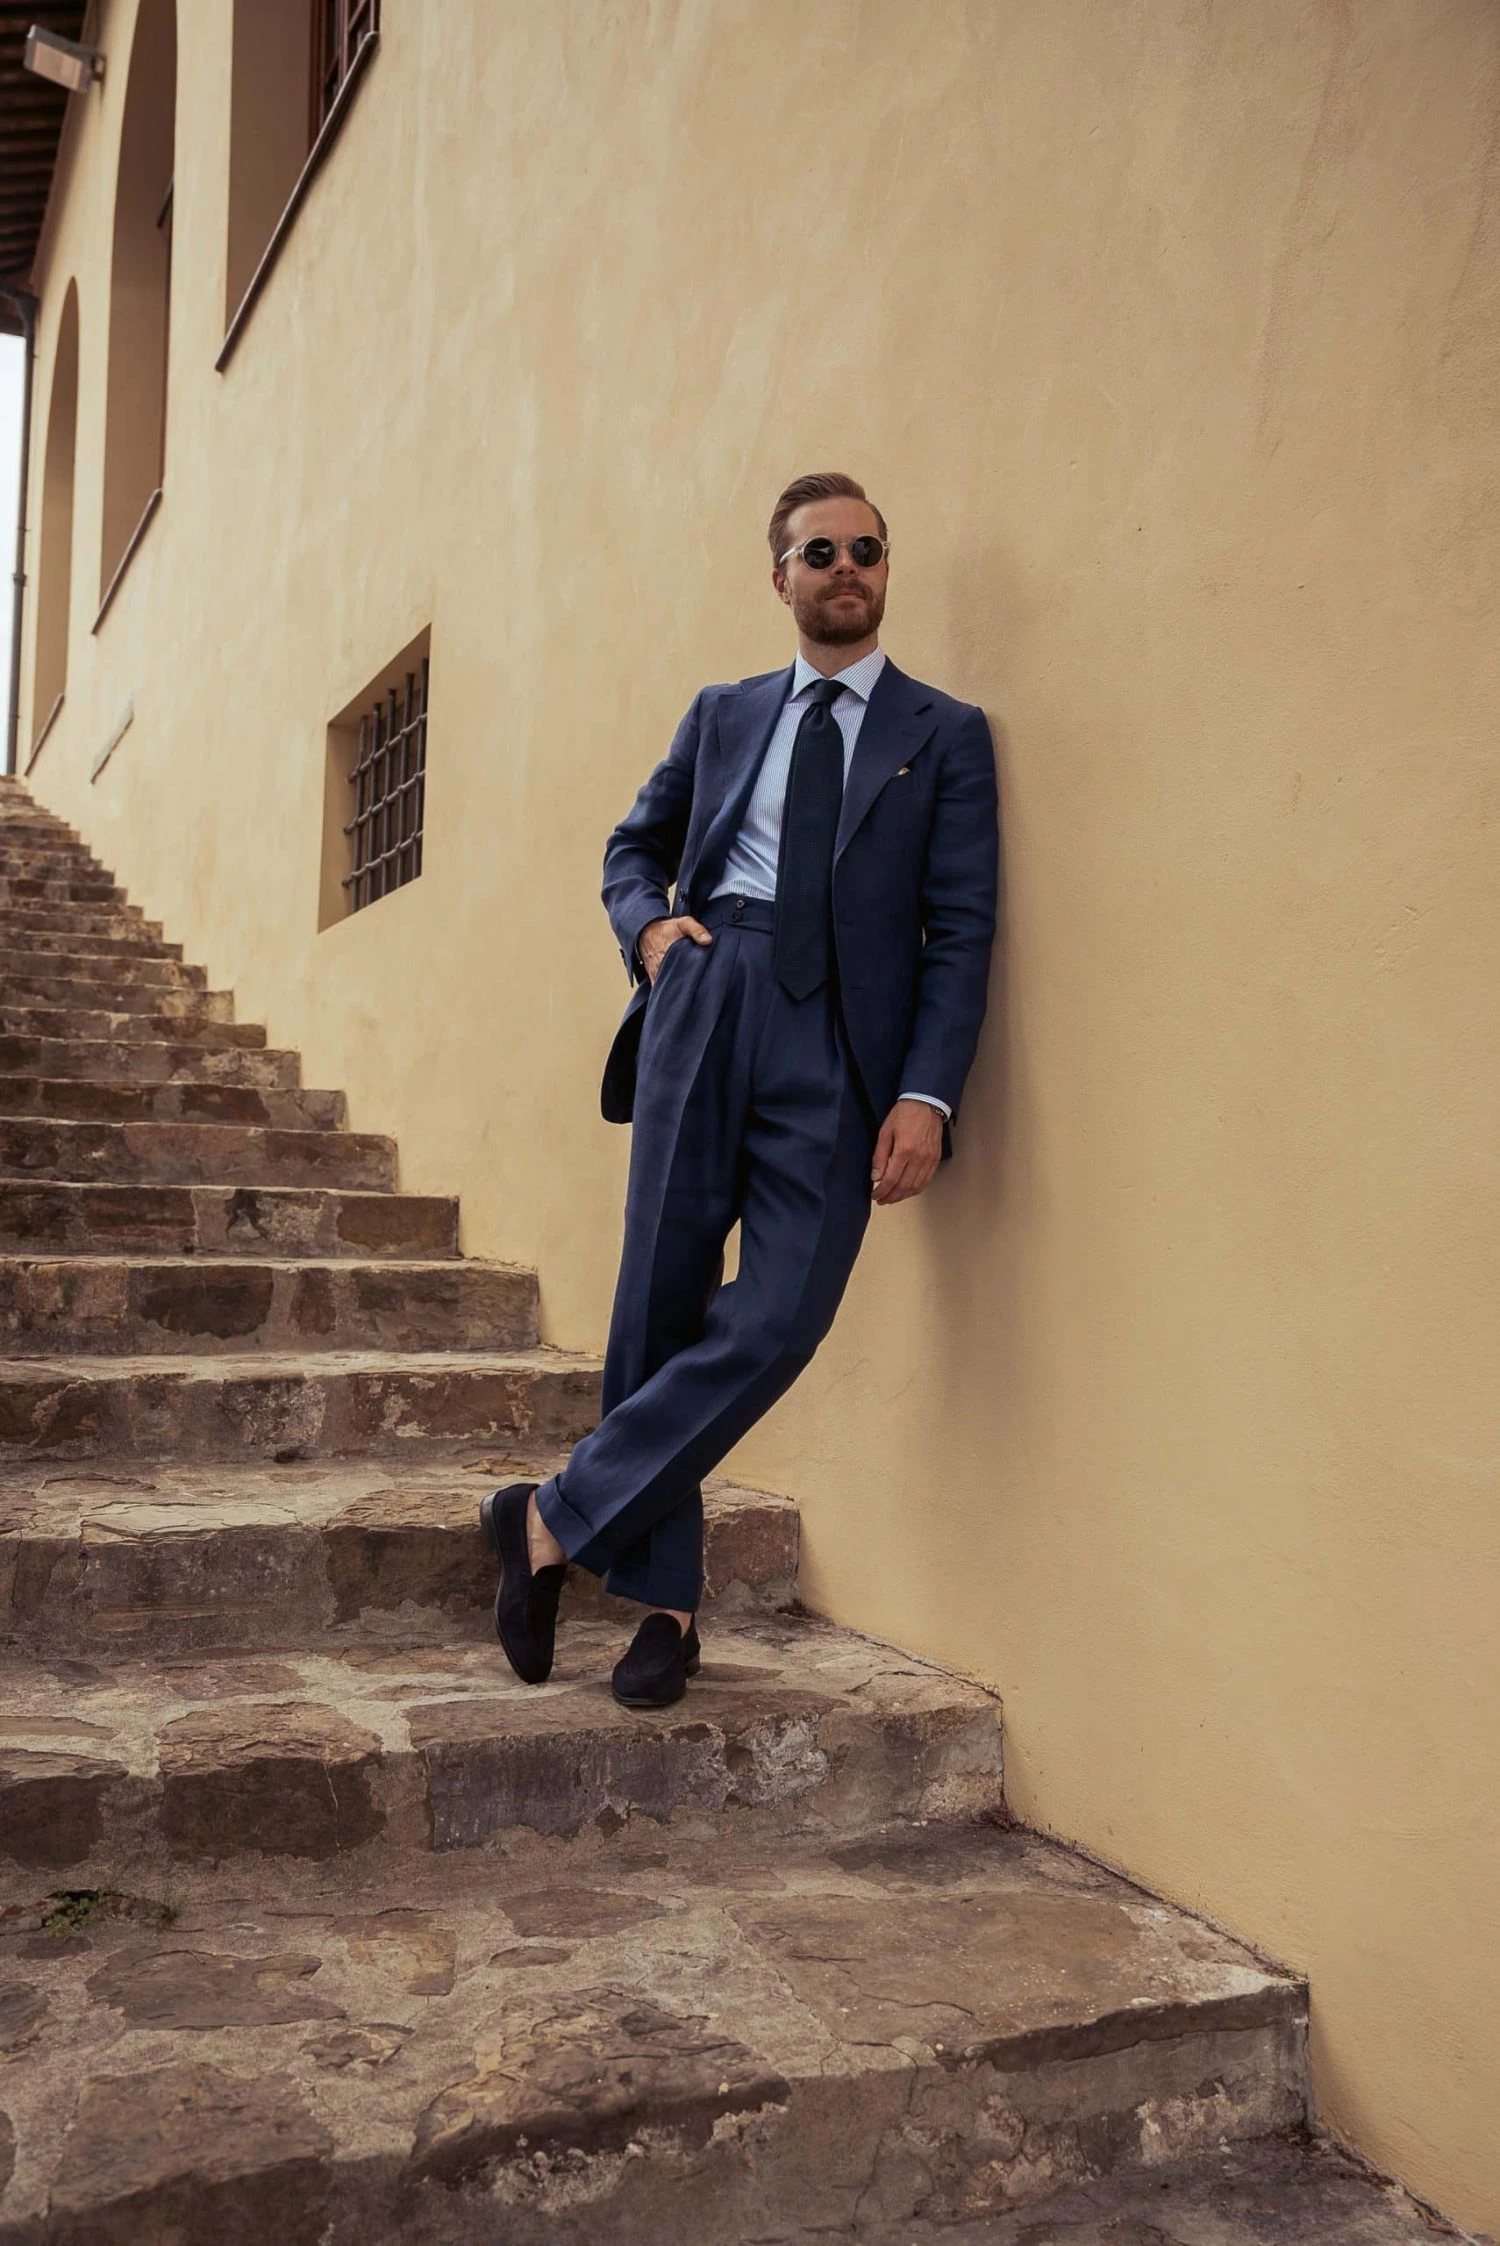 distance shot Johan Wikstrøm on old stoneslab stairs leaning against a wall, wearing sunglasses and a custom navy blue linen suit at Pitti Uomo